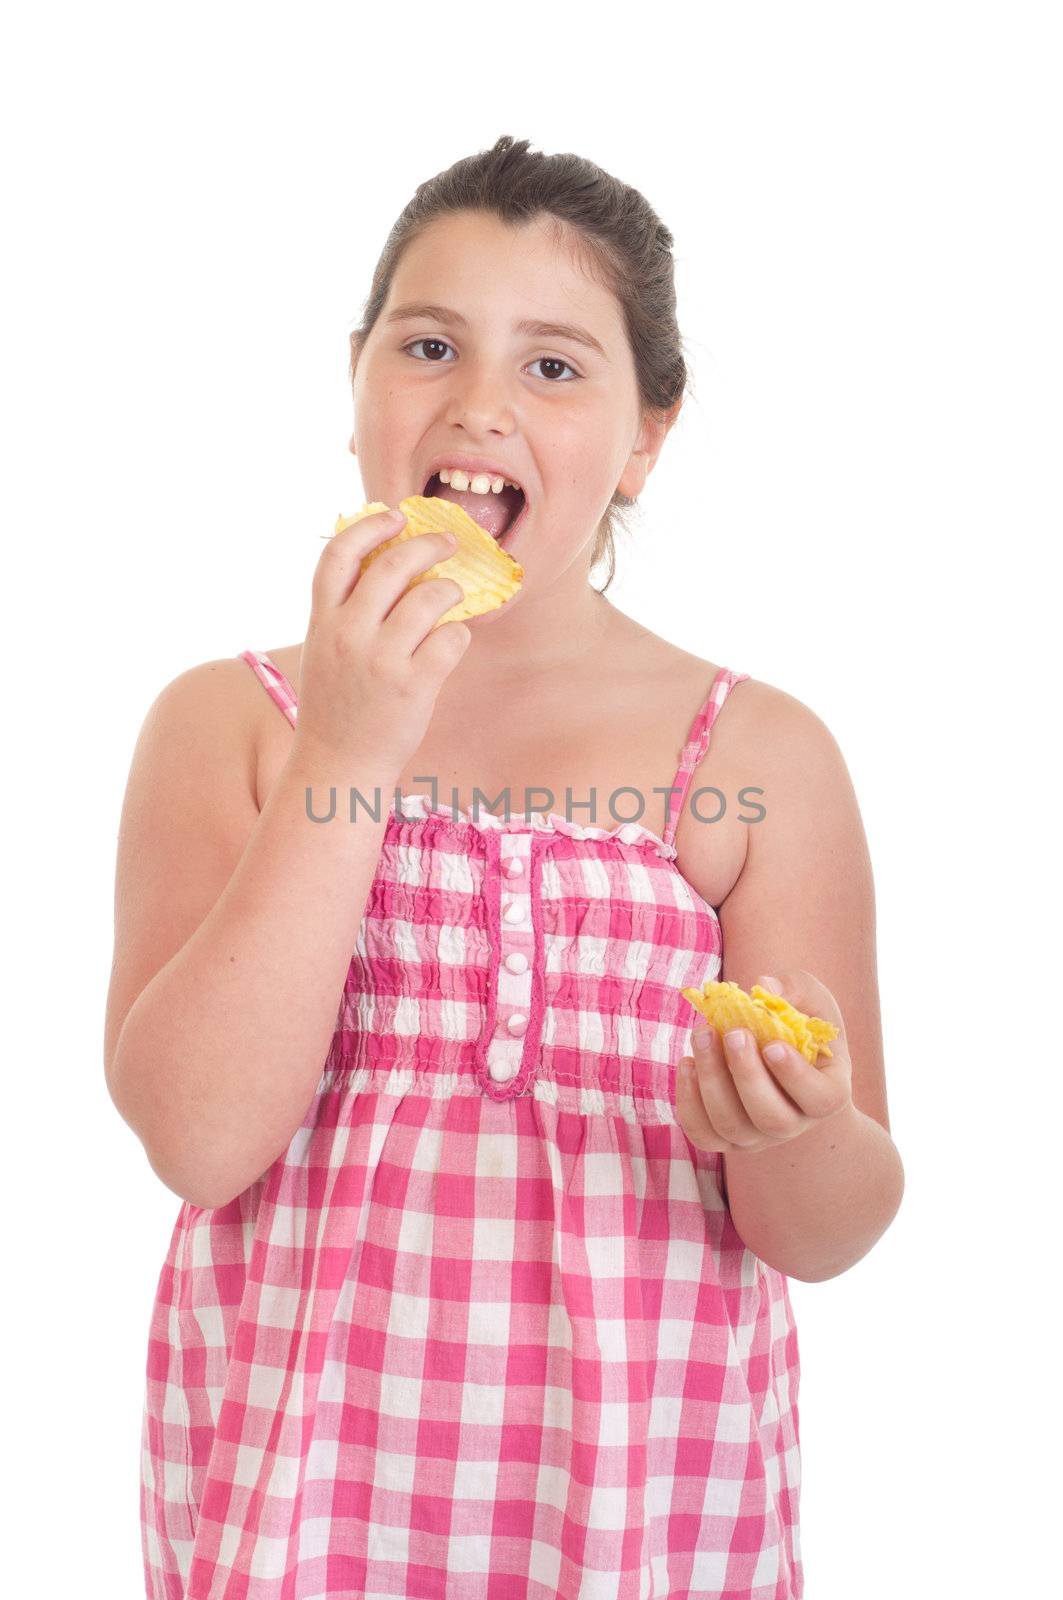 cute little girl eating chips (isolated on white background)